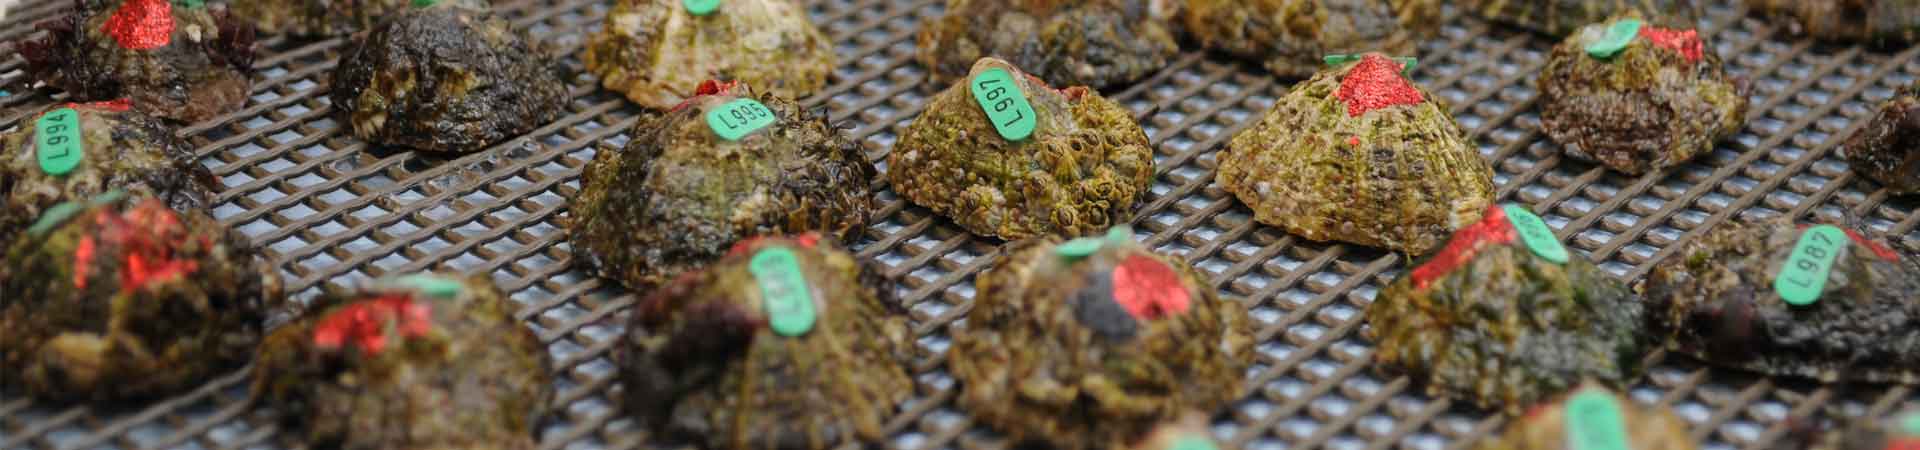 Several limpets marked with red and bearing green tags ready for behavioural study